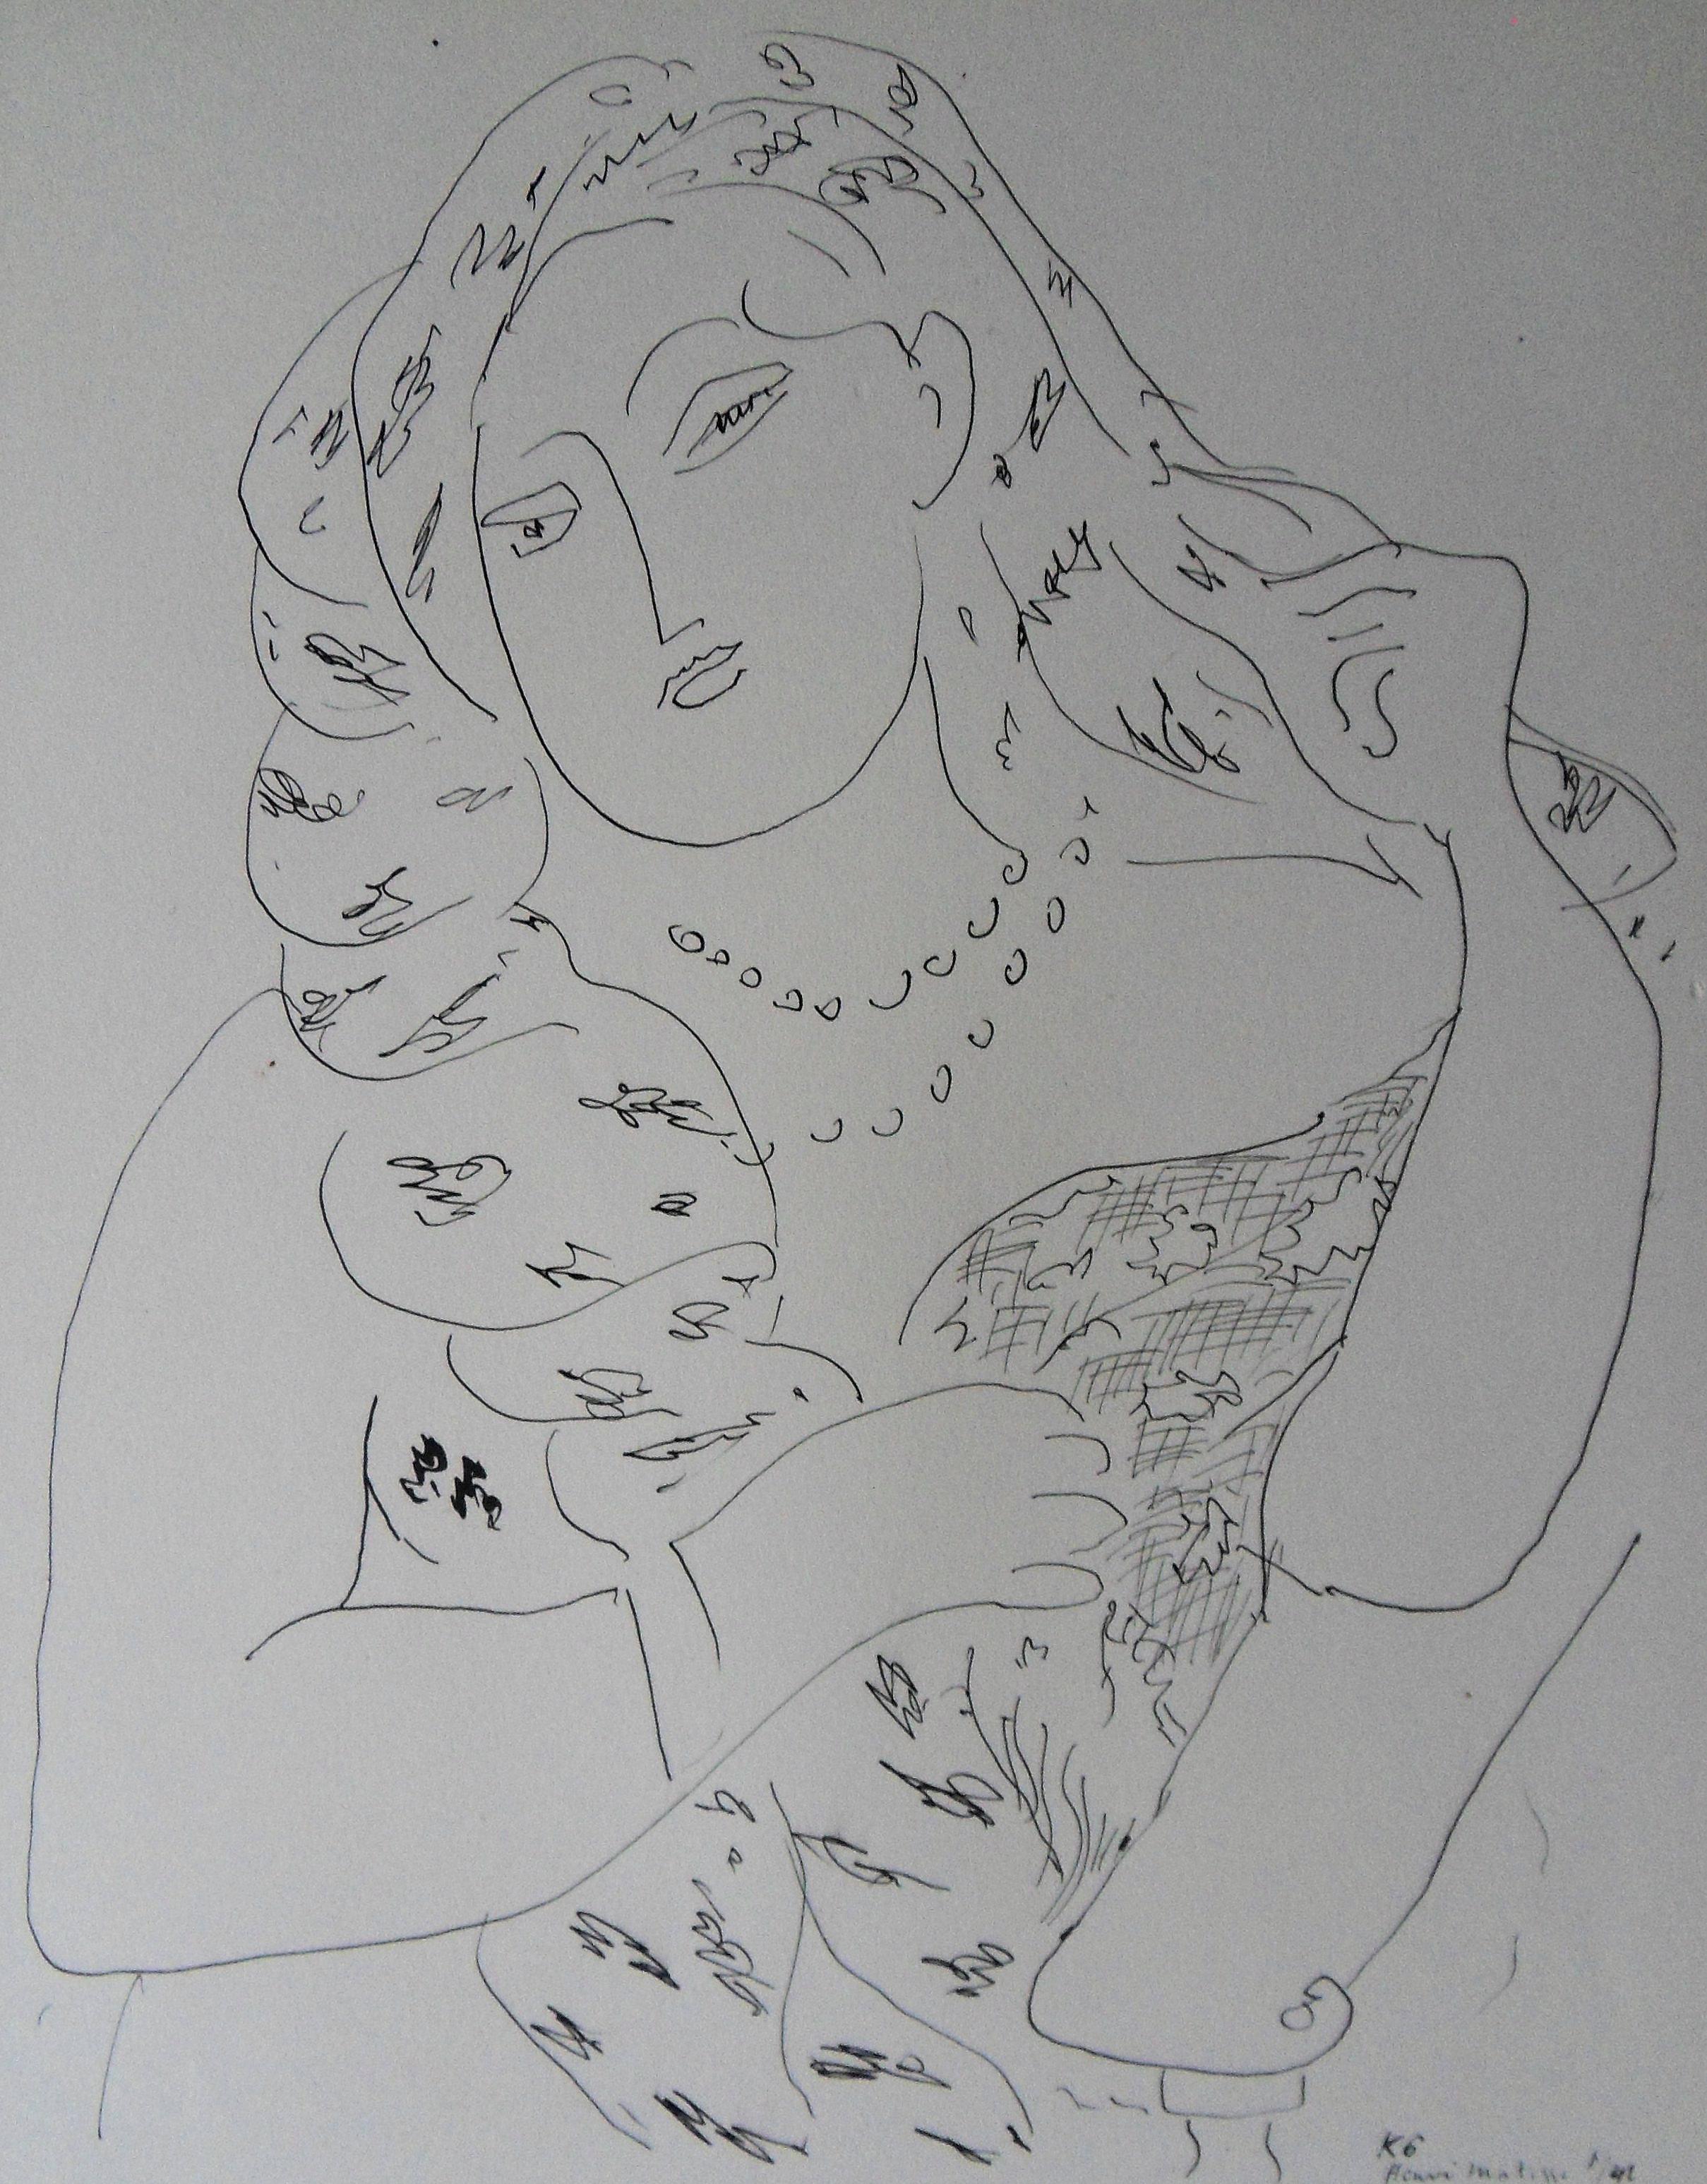 Henri MATISSE (After)
Elegant Woman

Lithograph after a drawing 
Signature and date printed in the plate
On vellum 32.5 x 24.5 cm (c. 12.6 x 9.4 inch)

INFORMATION : This lithograph is one of a rare edition made during the Second World War (1941 -